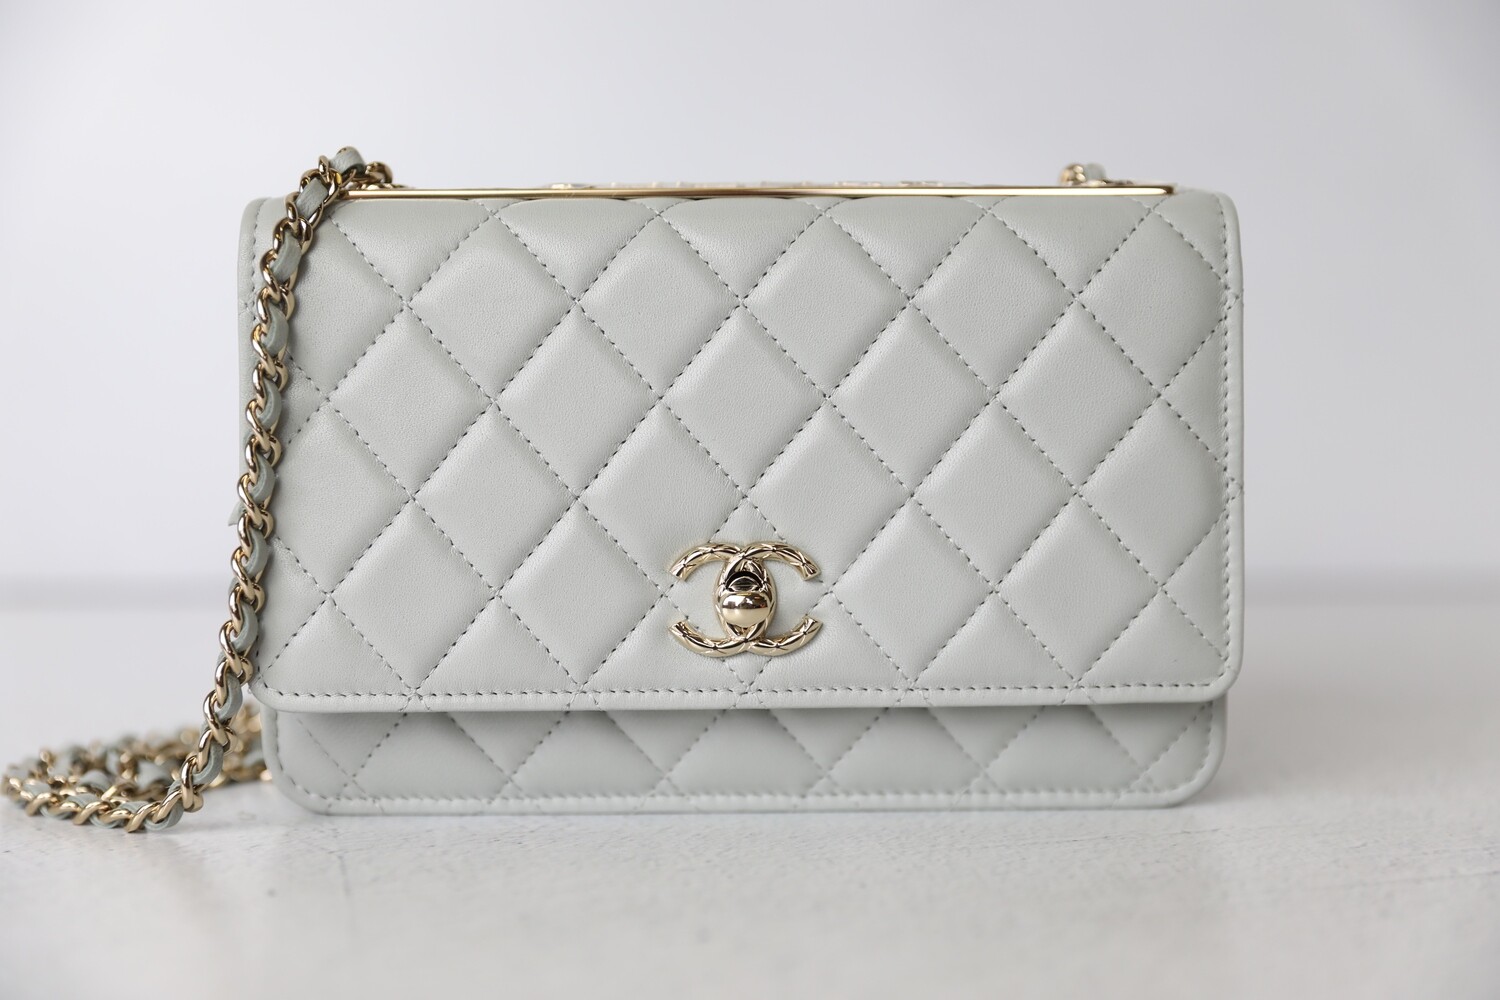 Chanel Trendy Wallet On Chain, Grey Lambskin Leather With Gold Hardware,  New In Box Wa001 - Julia Rose Boston | Shop